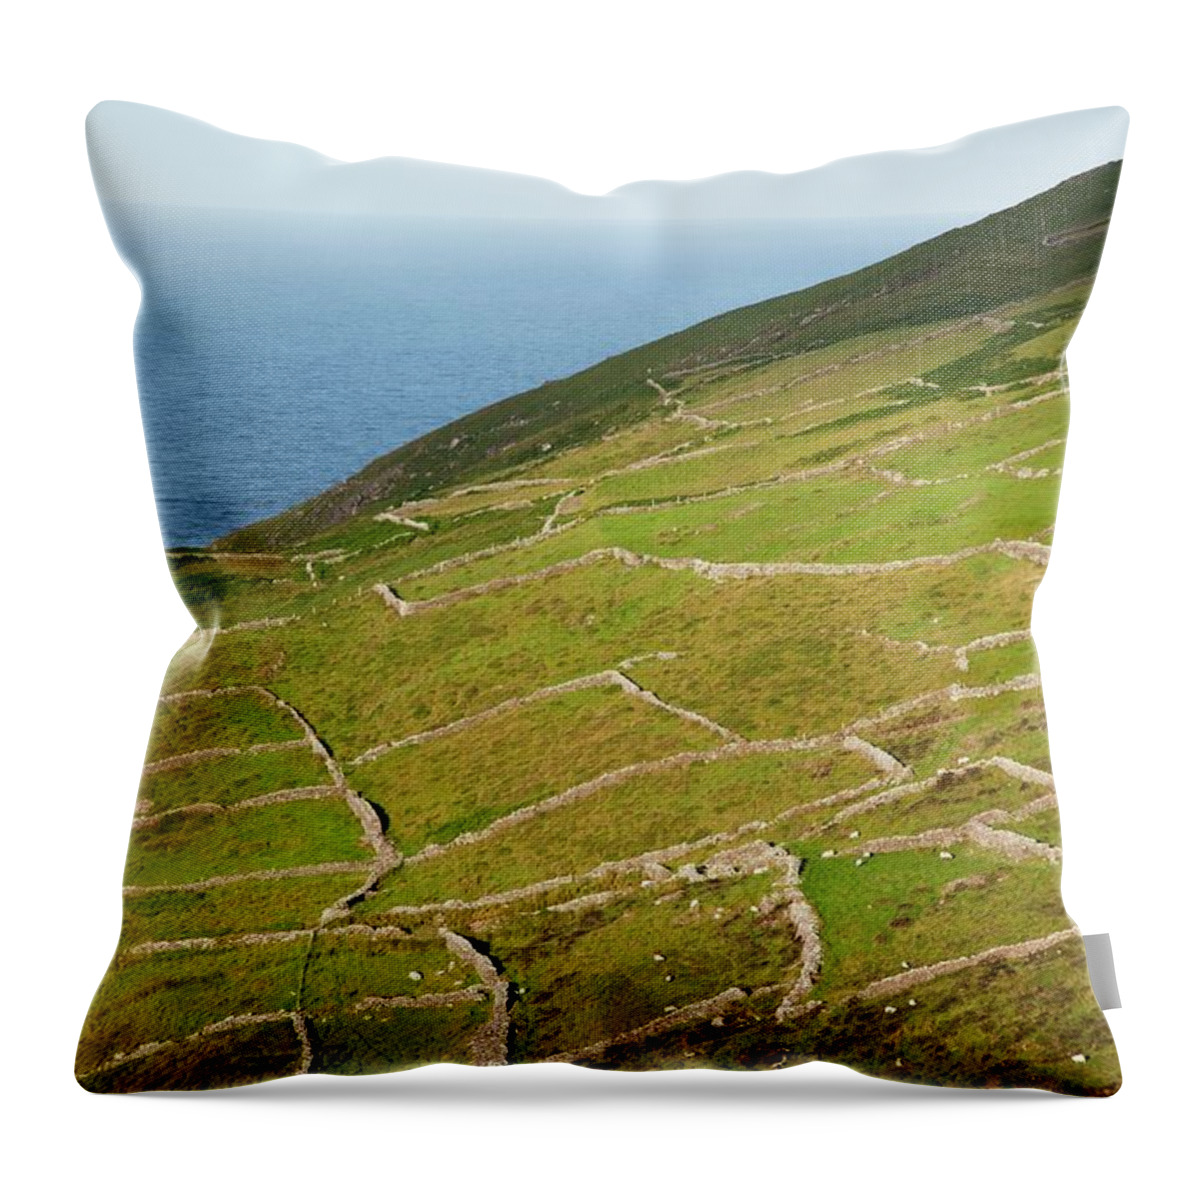 Scenics Throw Pillow featuring the photograph Stone Barriers On Coastal Field by Design Pics / Peter Zoeller